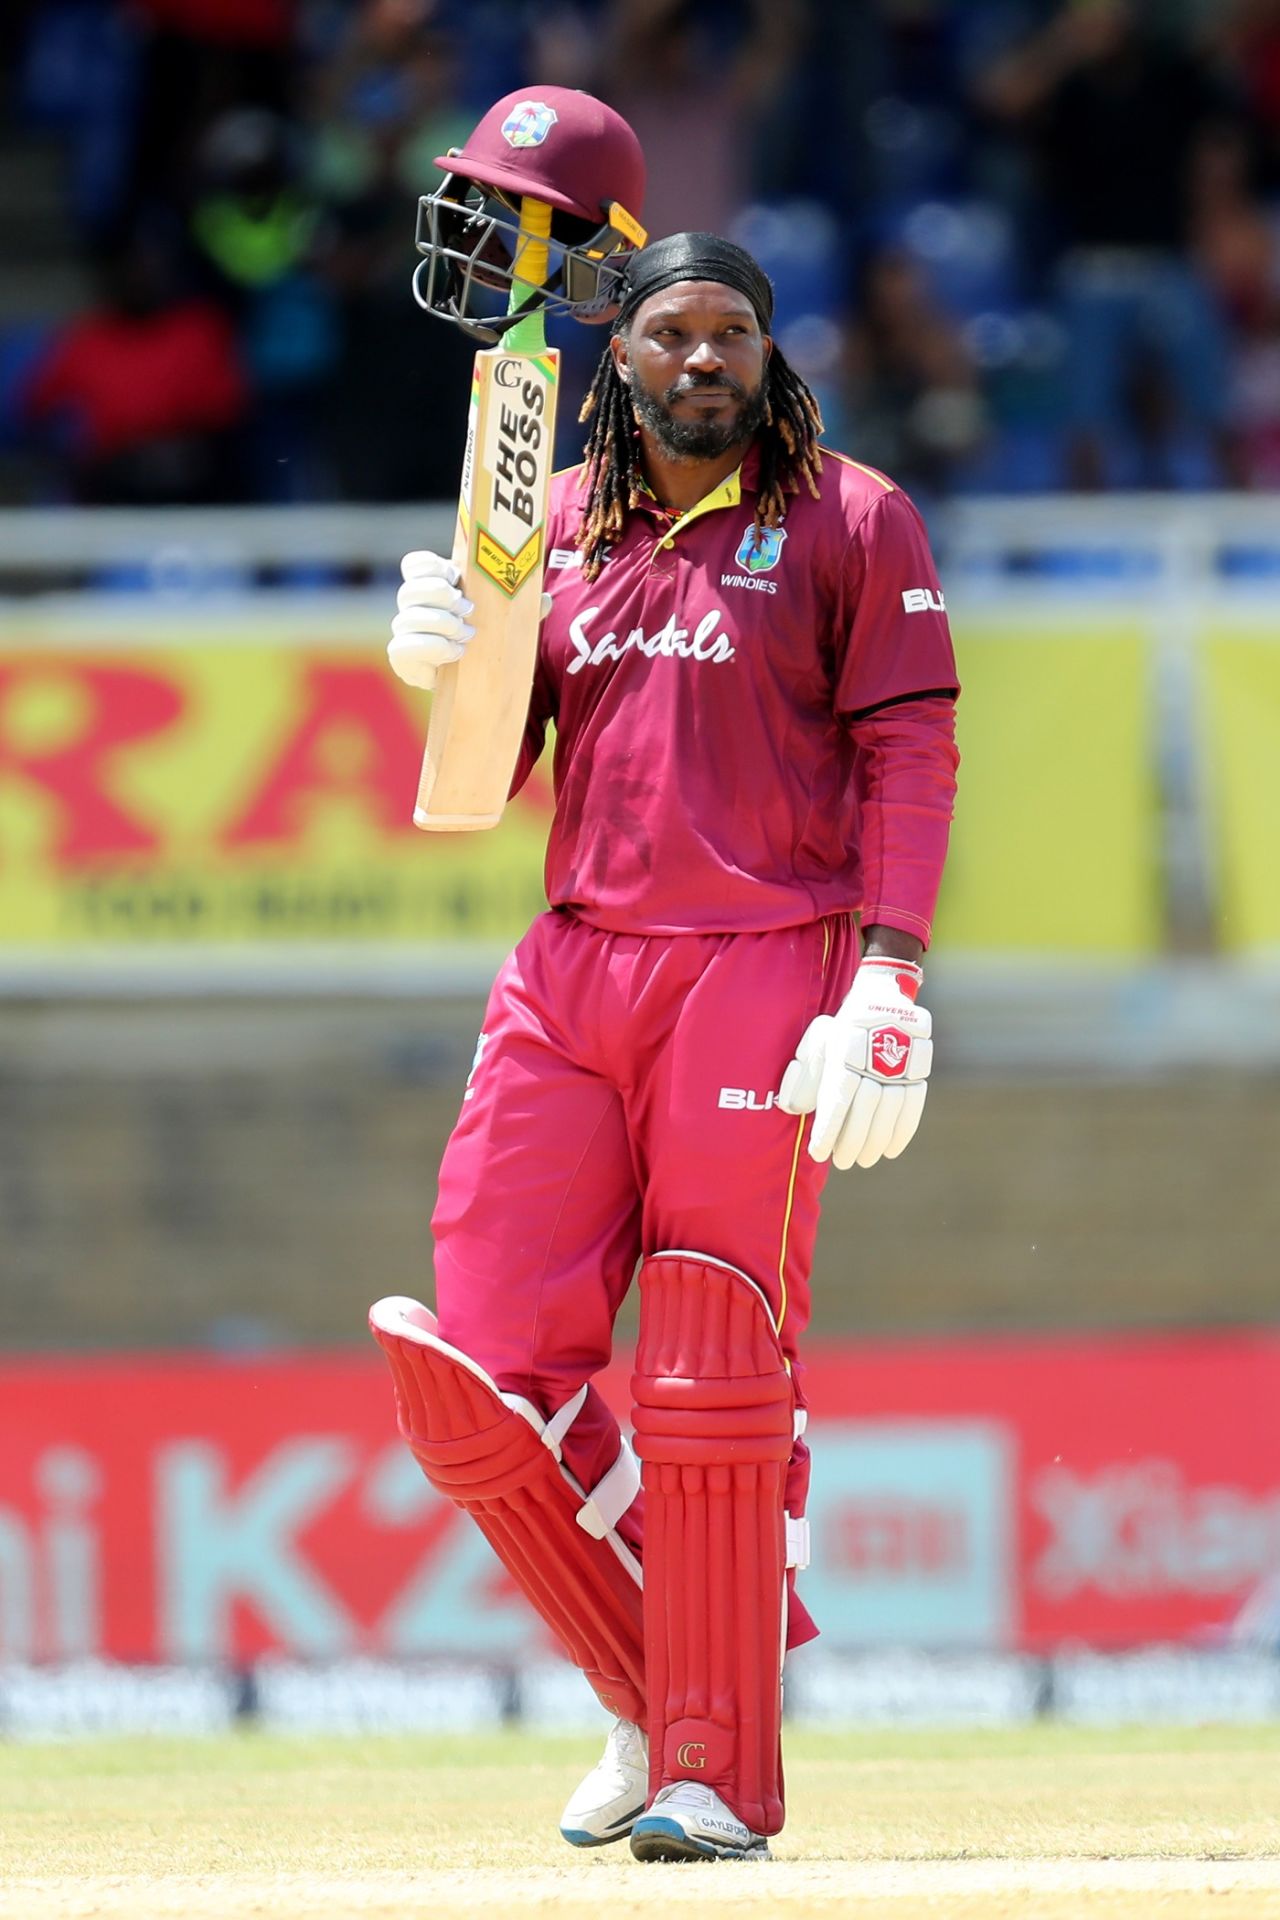 Chris Gayle acknowledges the applause after bringing up his fifty, West Indies v India, 3rd ODI, Port of Spain, August 14, 2019